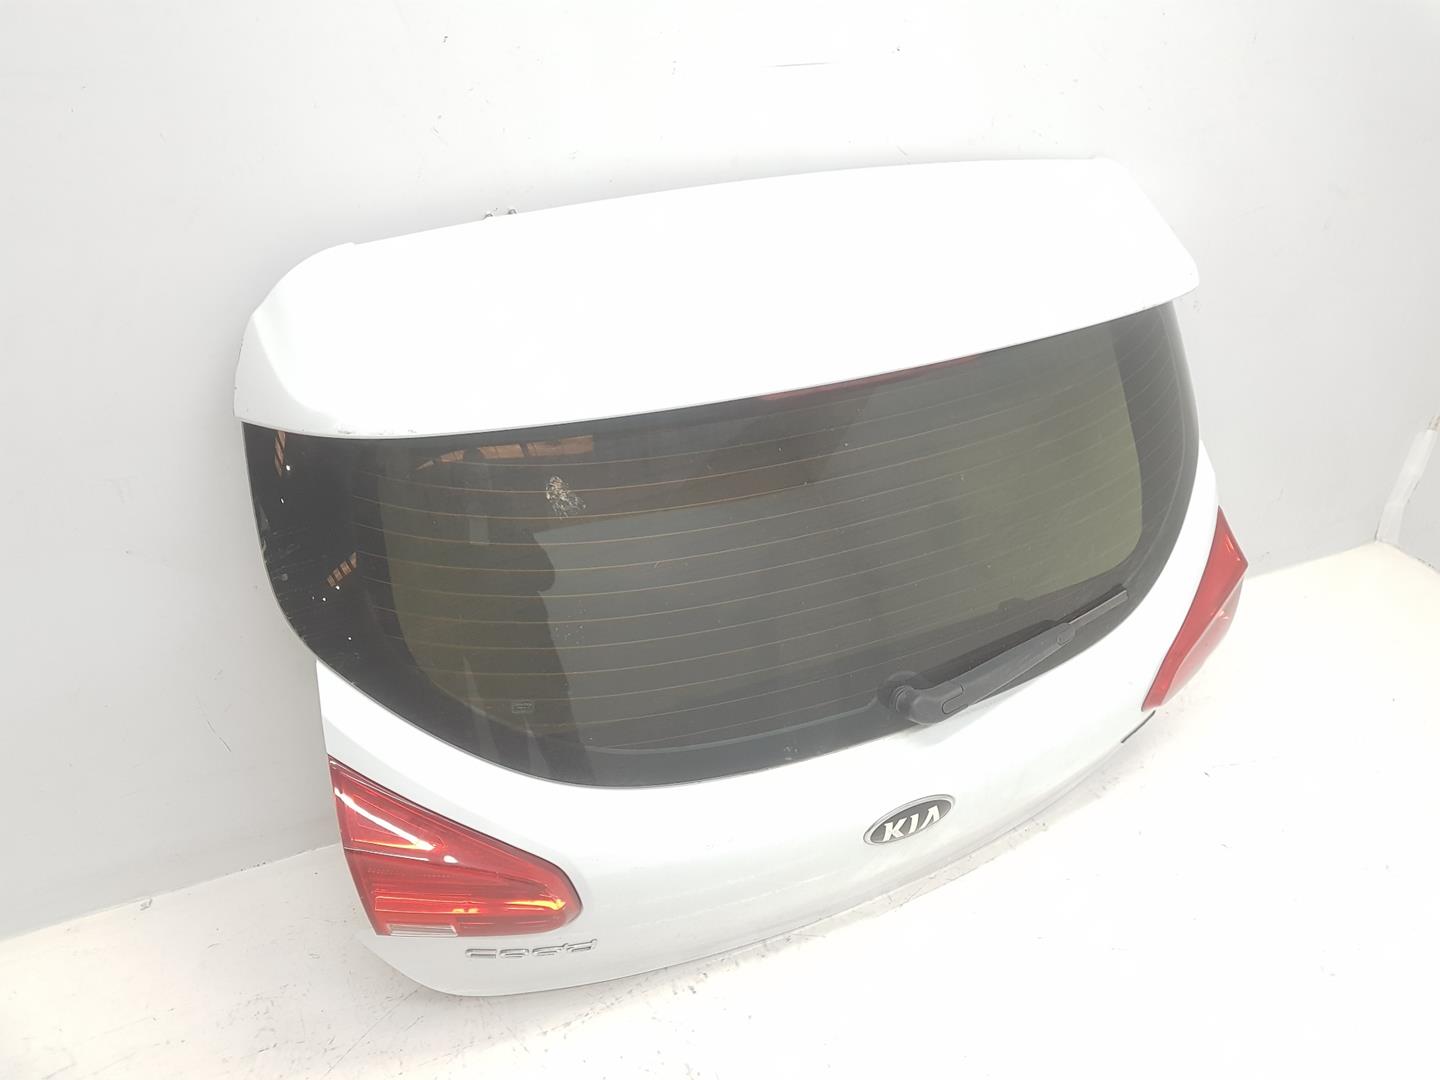 KIA Cee'd 2 generation (2012-2018) Bootlid Rear Boot 73700A2000, COLORBLANCOWD, 1161CB 24837490